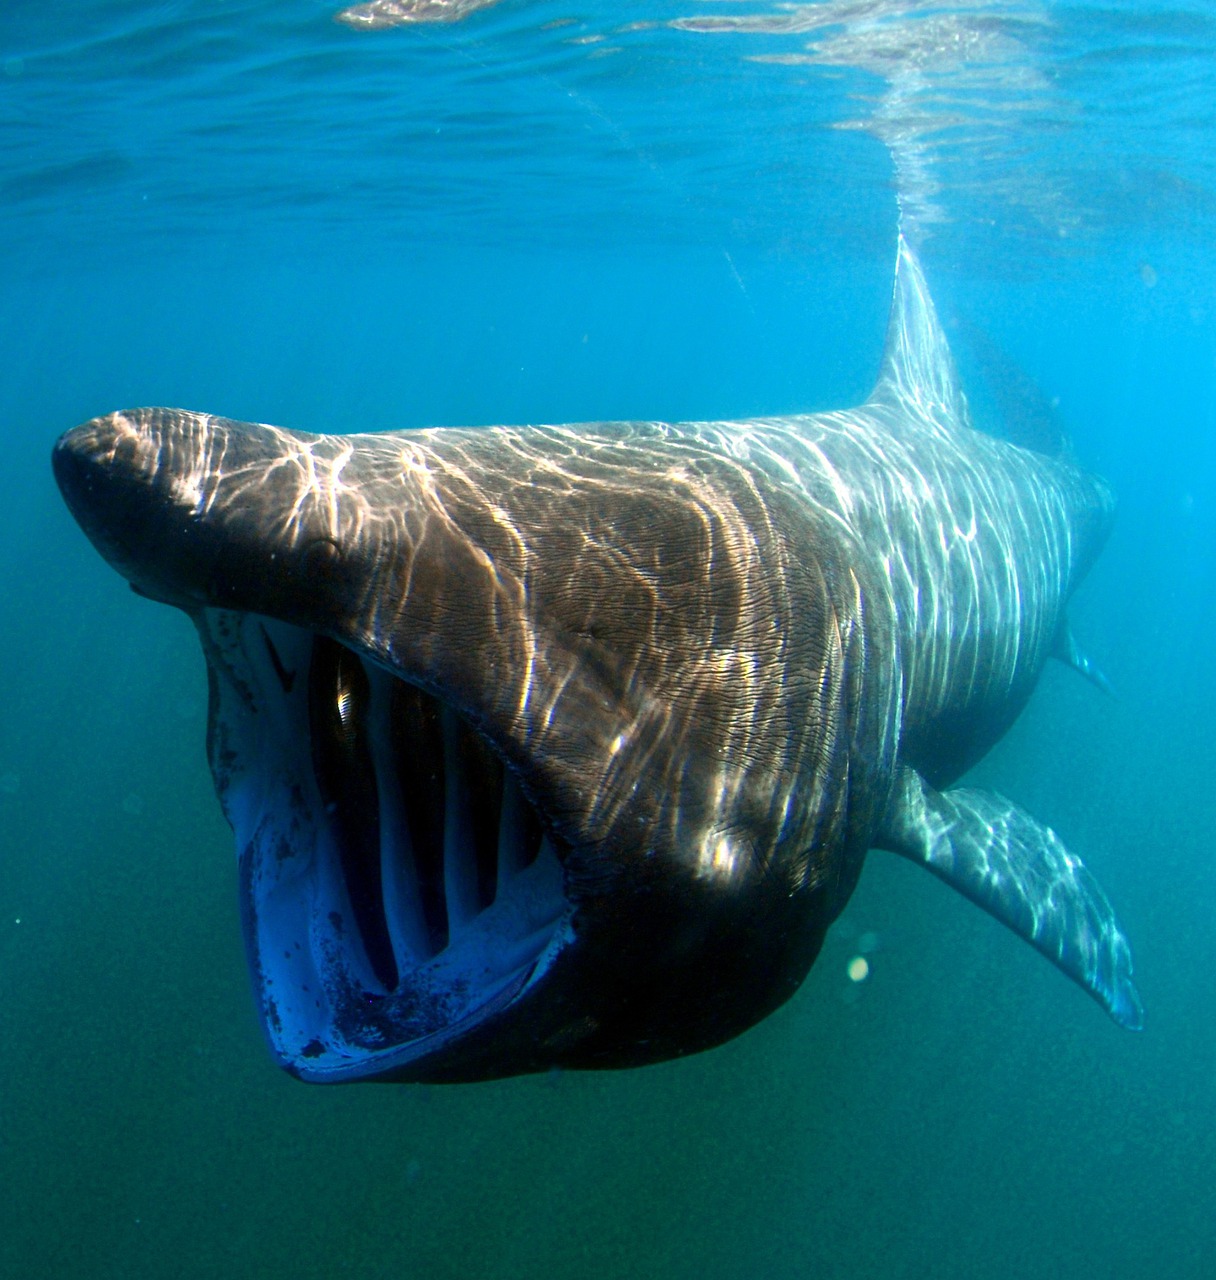 Basking sharks granted new legal protection